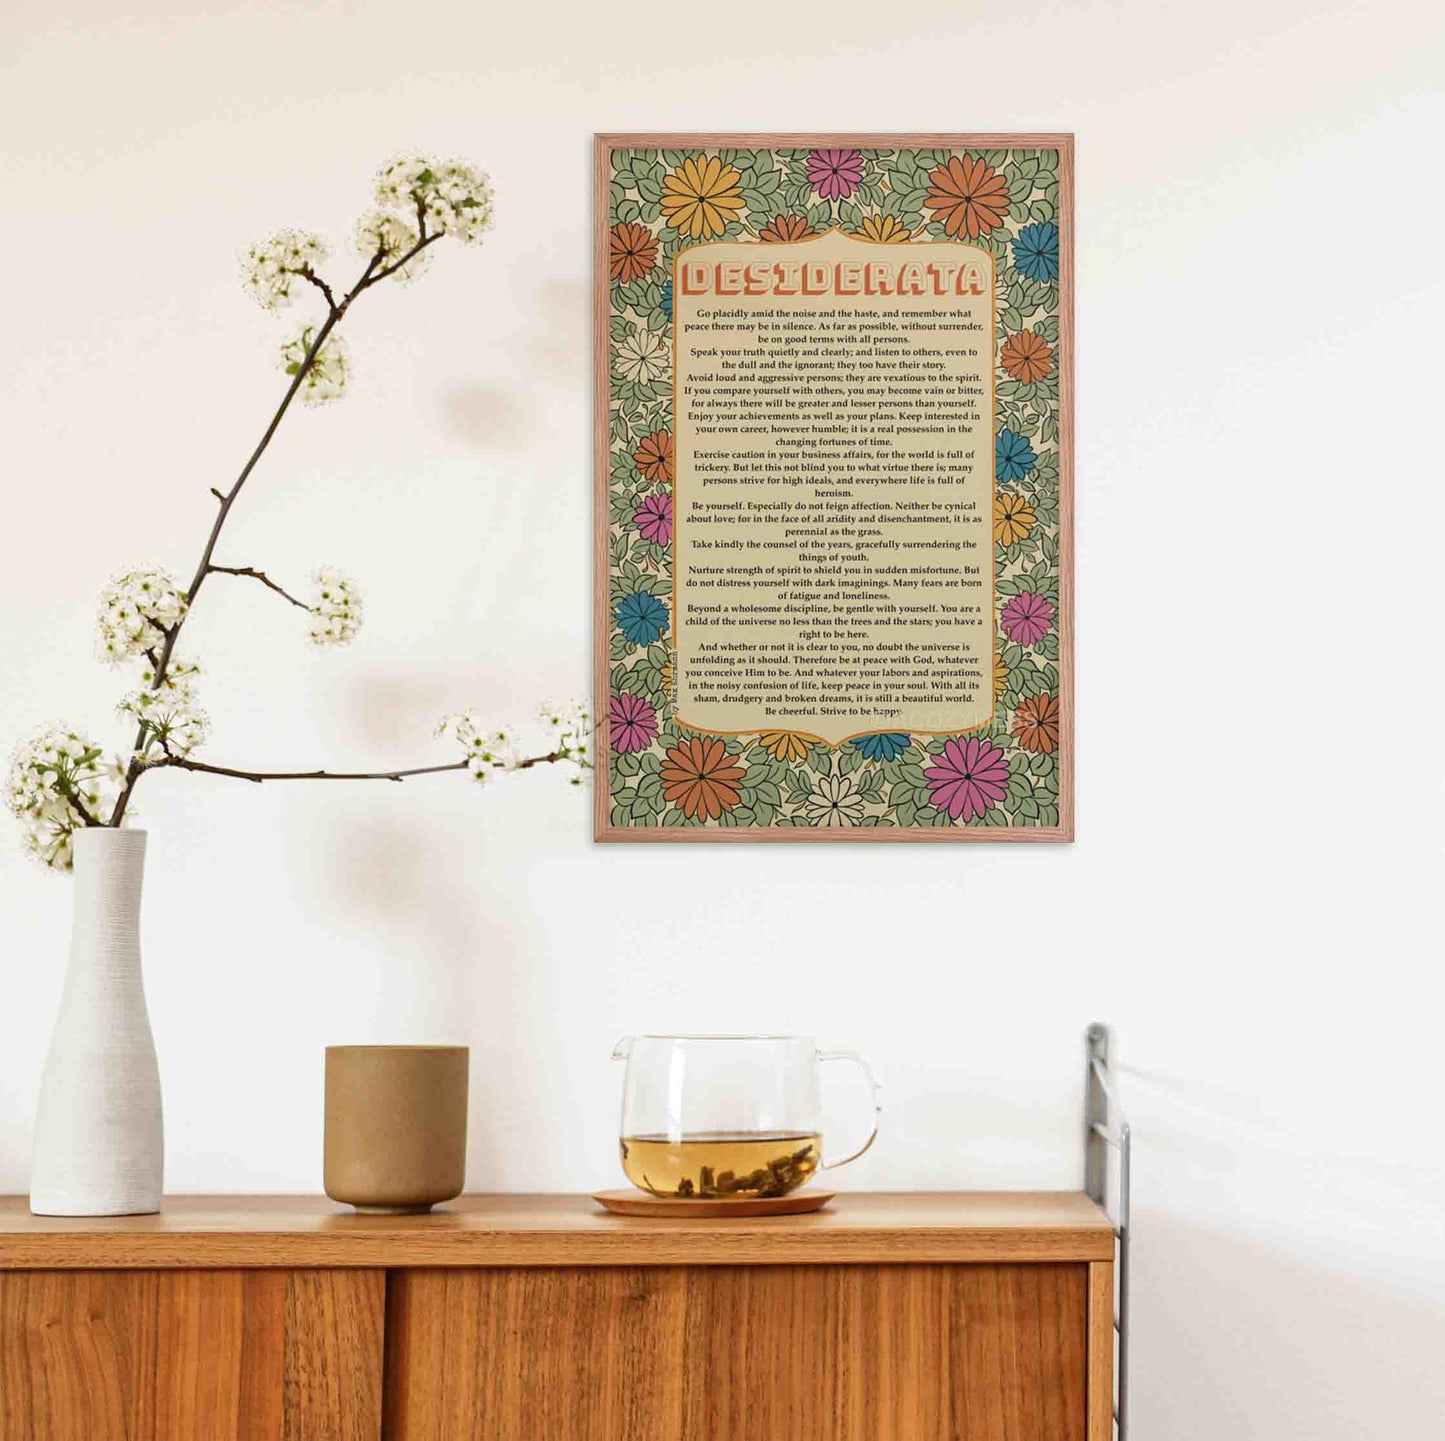 Desiderata poem Print with floral design in soothing colors in oak frame